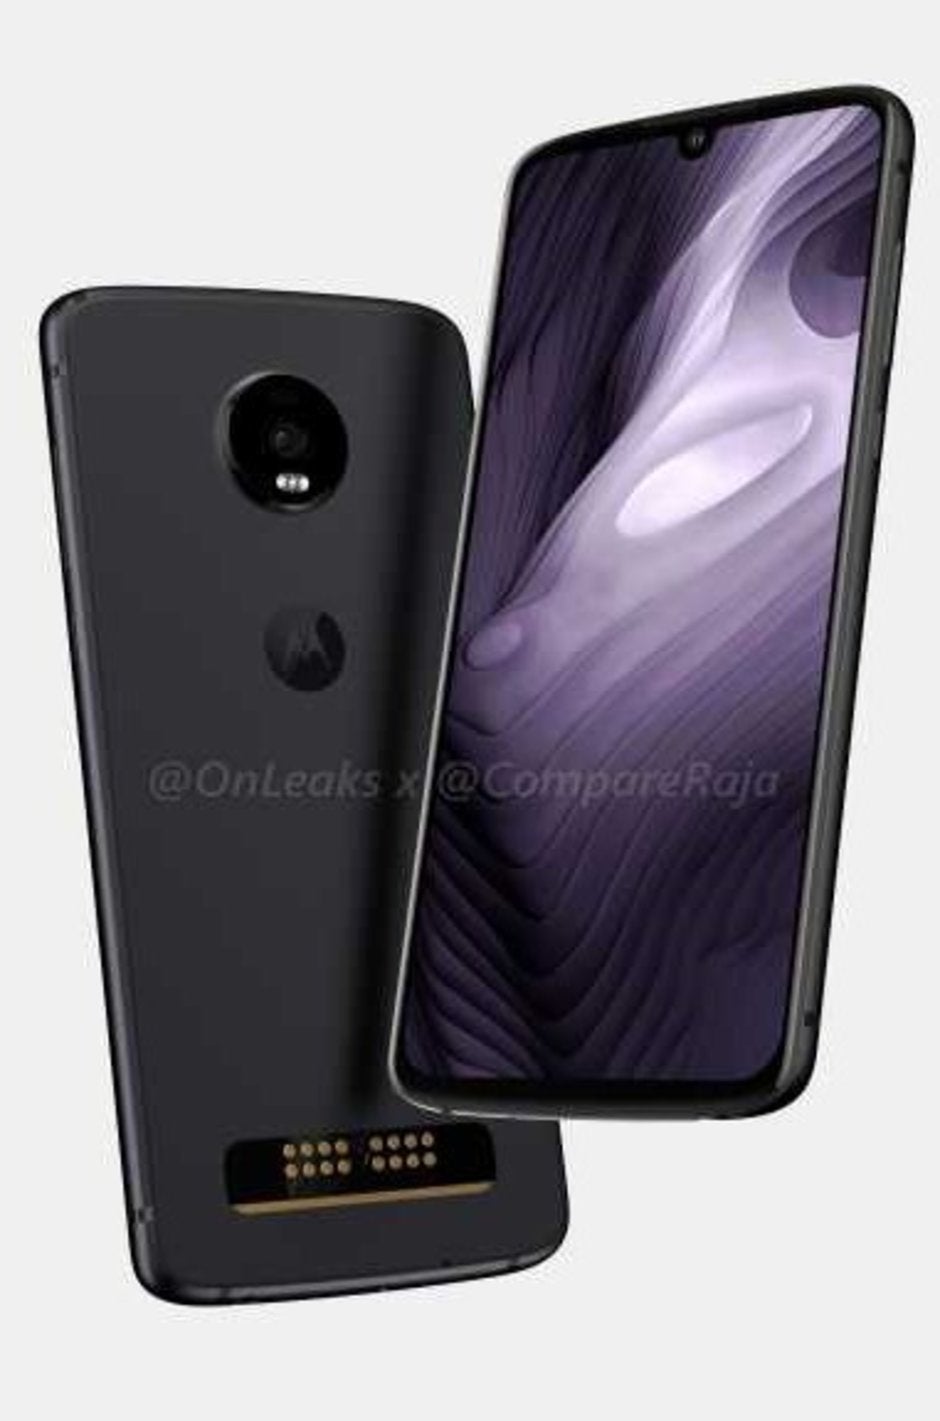 Moto Z4 Play leaks: notched display, single rear camera, Moto Mods support